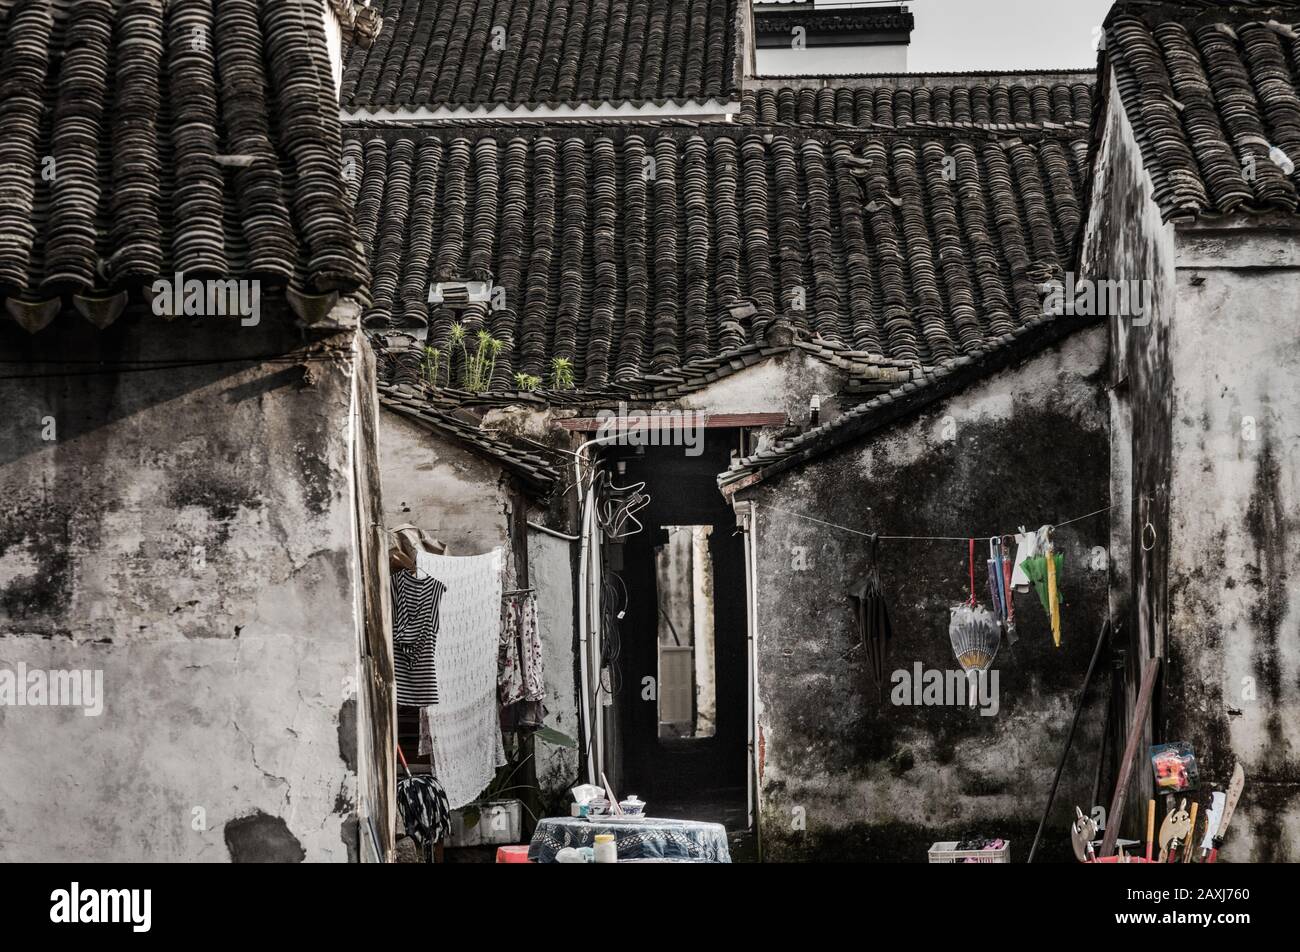 The streets and building in the historic water town of Tongi-Li, near Suzhou, China Stock Photo